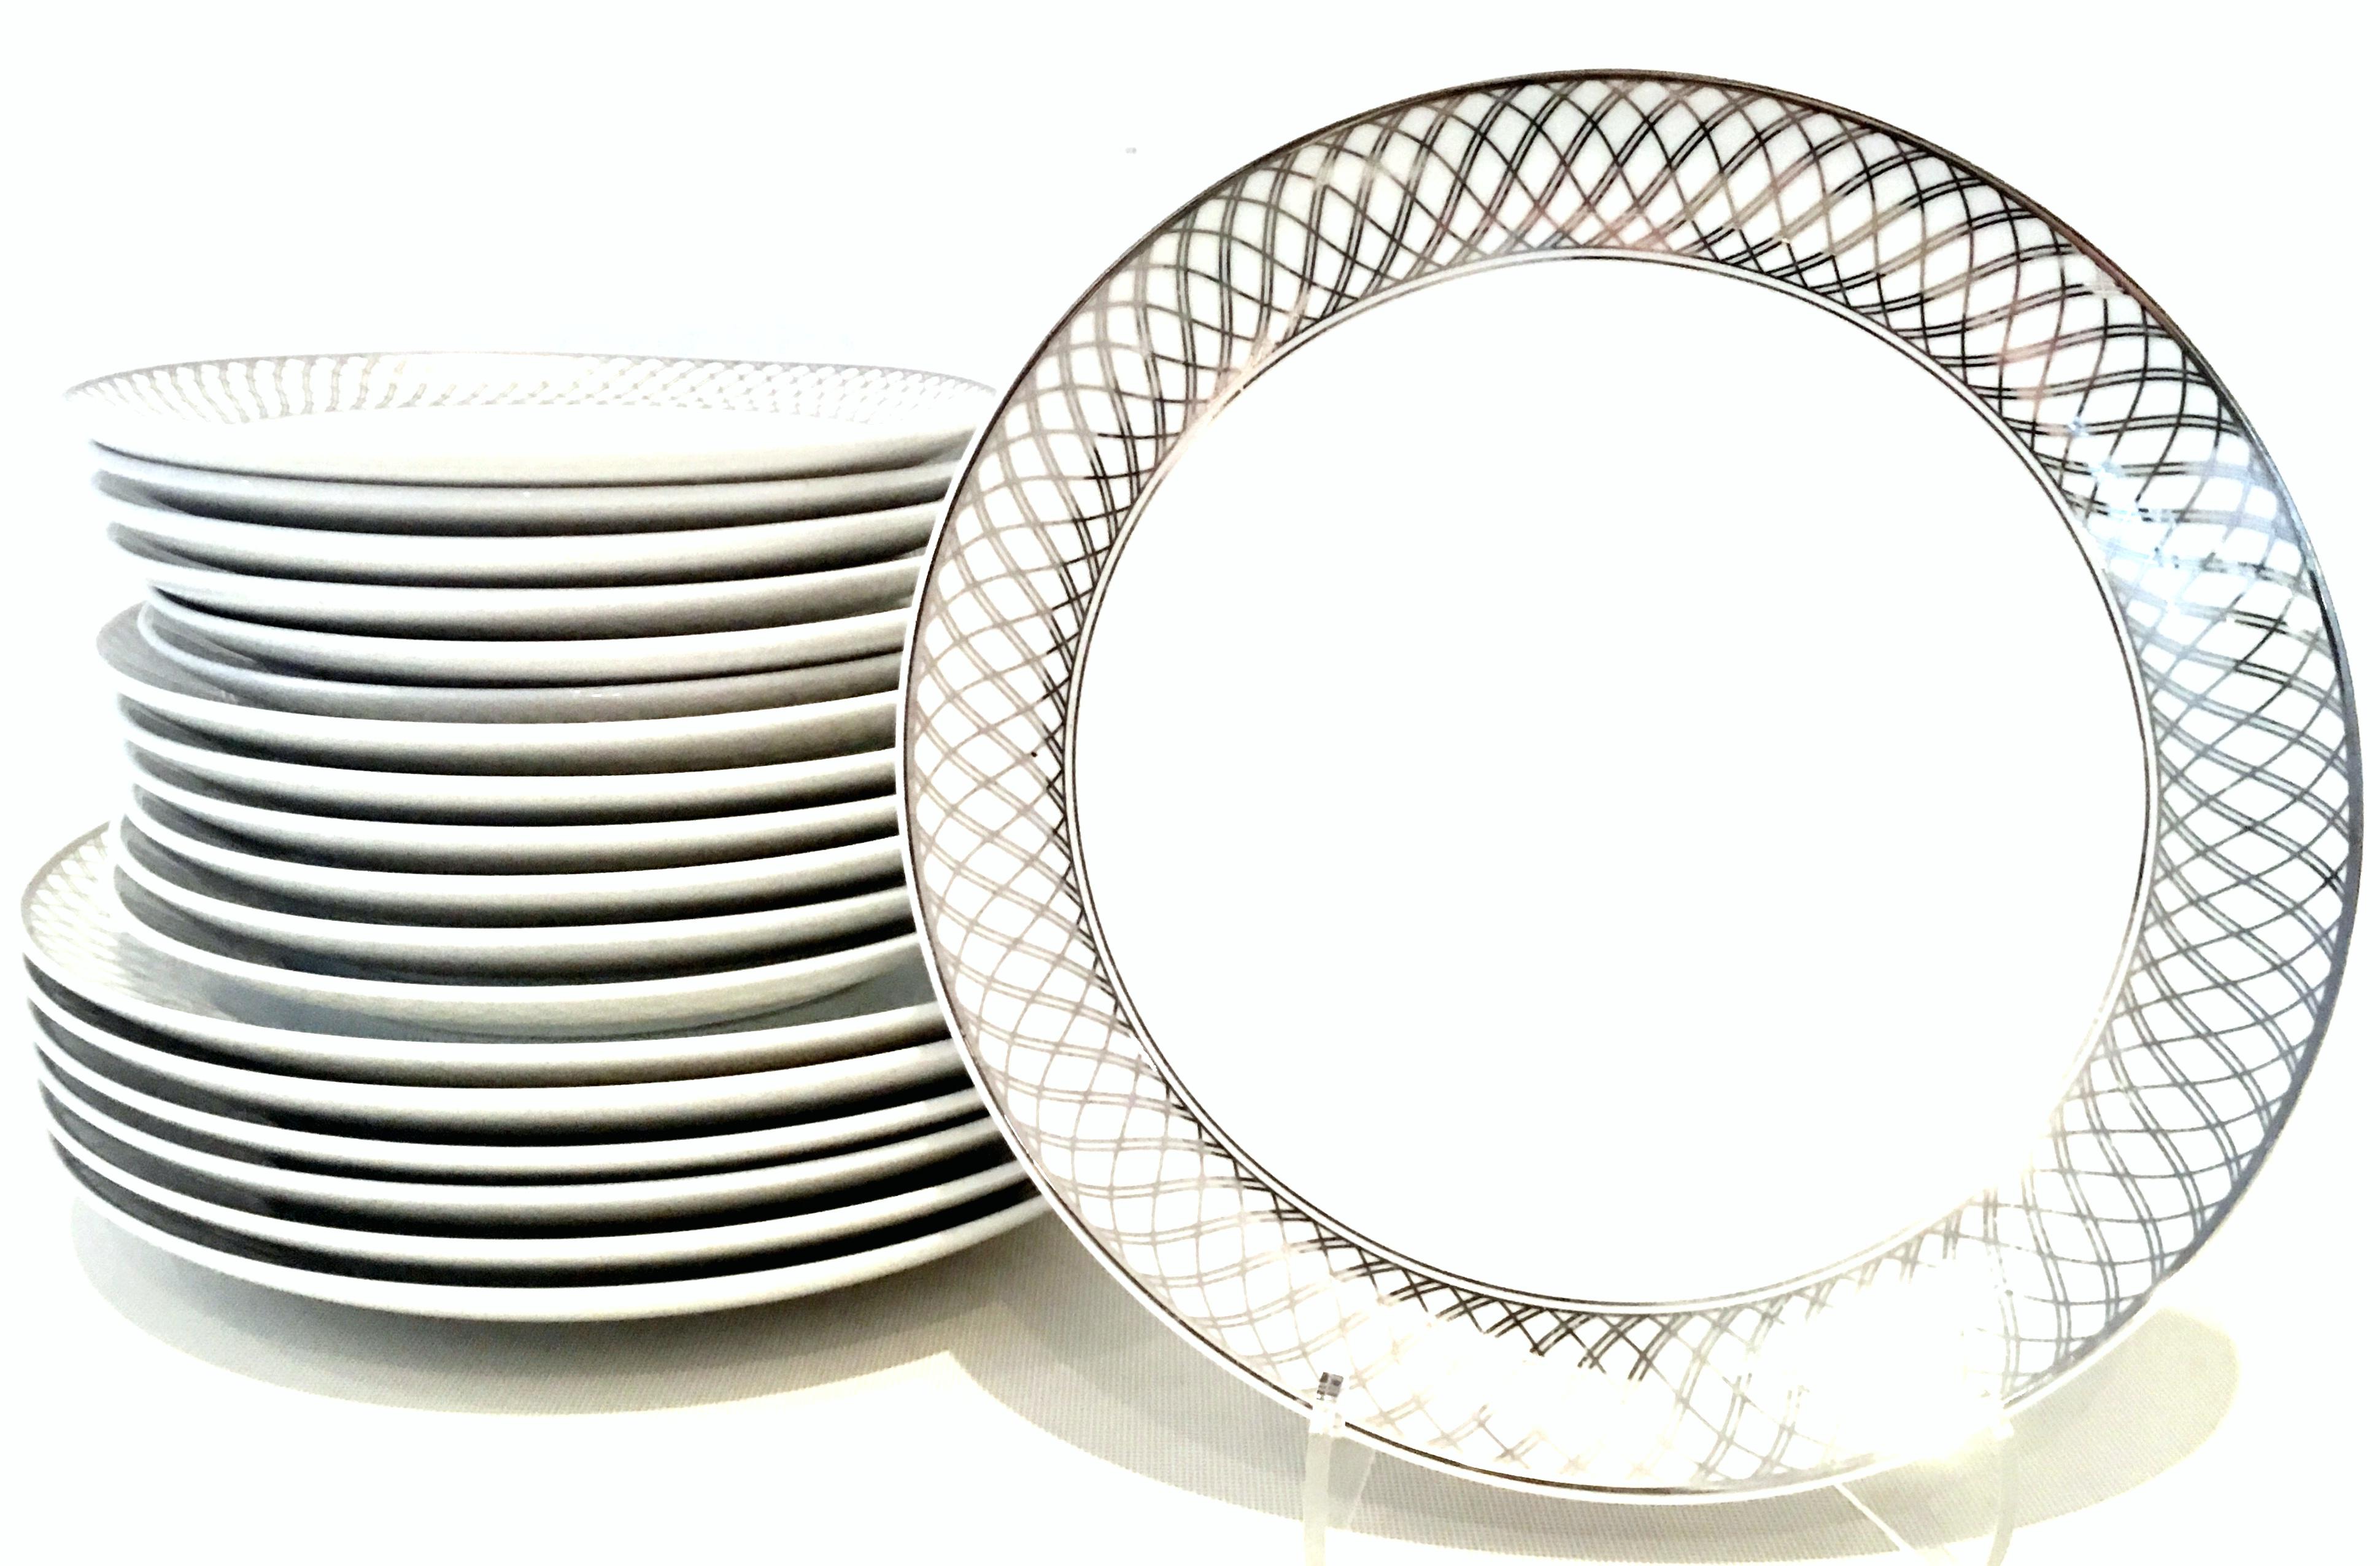 20th Century ceramic and platinum dinnerware set of 18 pieces by, Wessco for United Airlines-First Class Service. This Classic and timeless pattern features a coupe shape, bright white ground with silver platinum geometric basket weave and piping